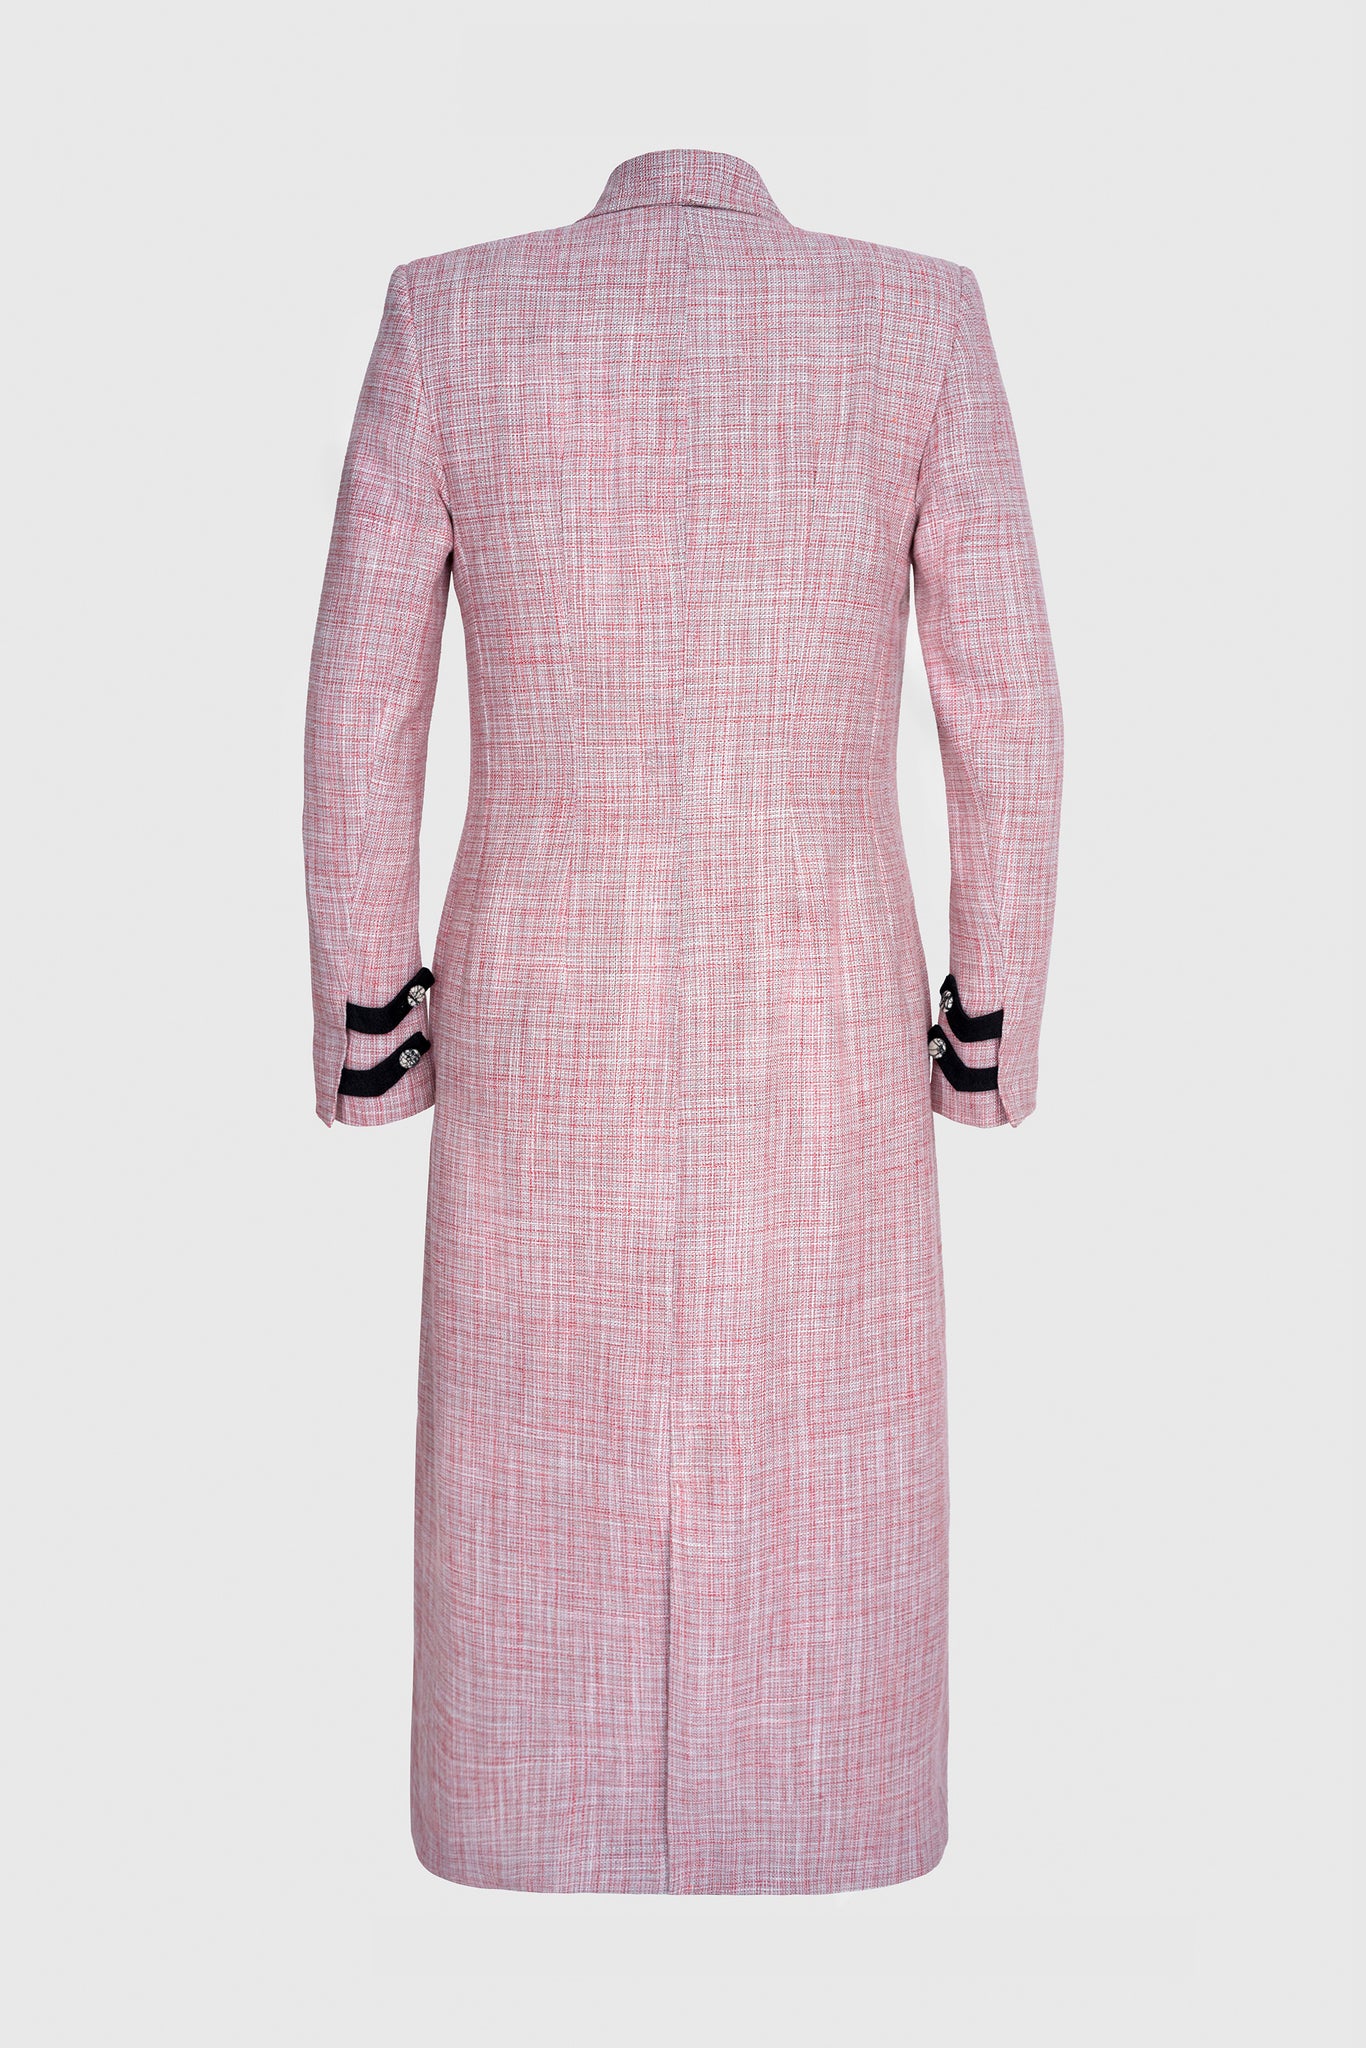 Pink Tailored Coat